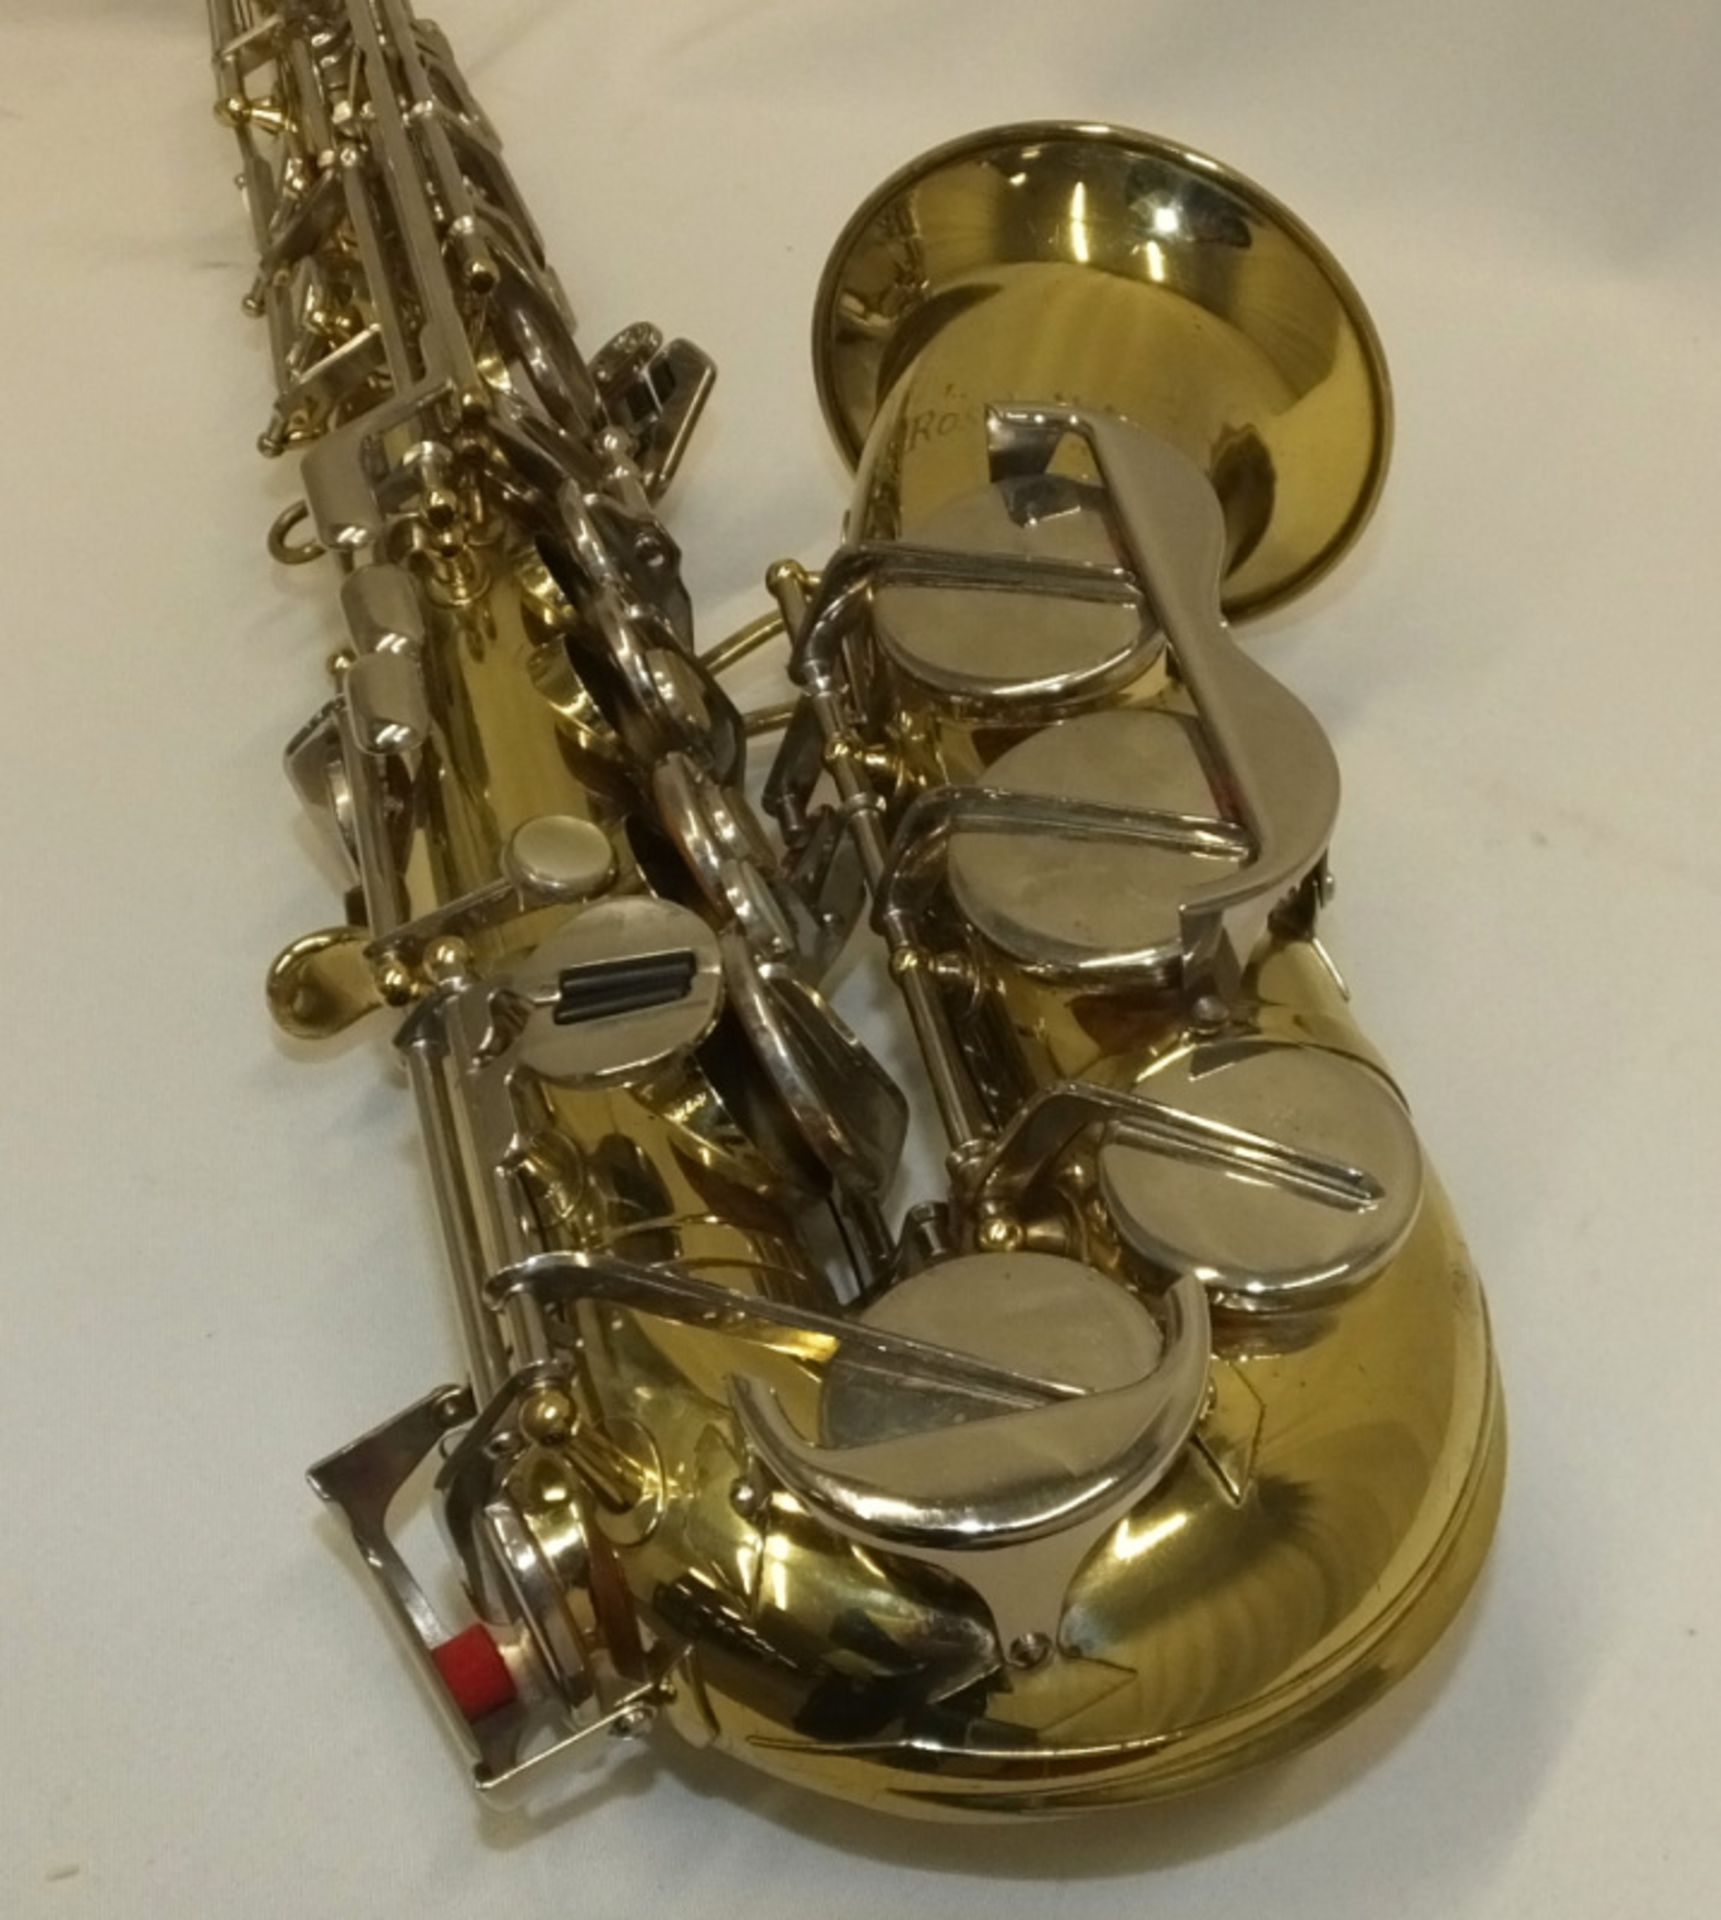 Rosehill Instruments Saxophone in case - serial number 141782 - Please check photos carefully - Image 4 of 17